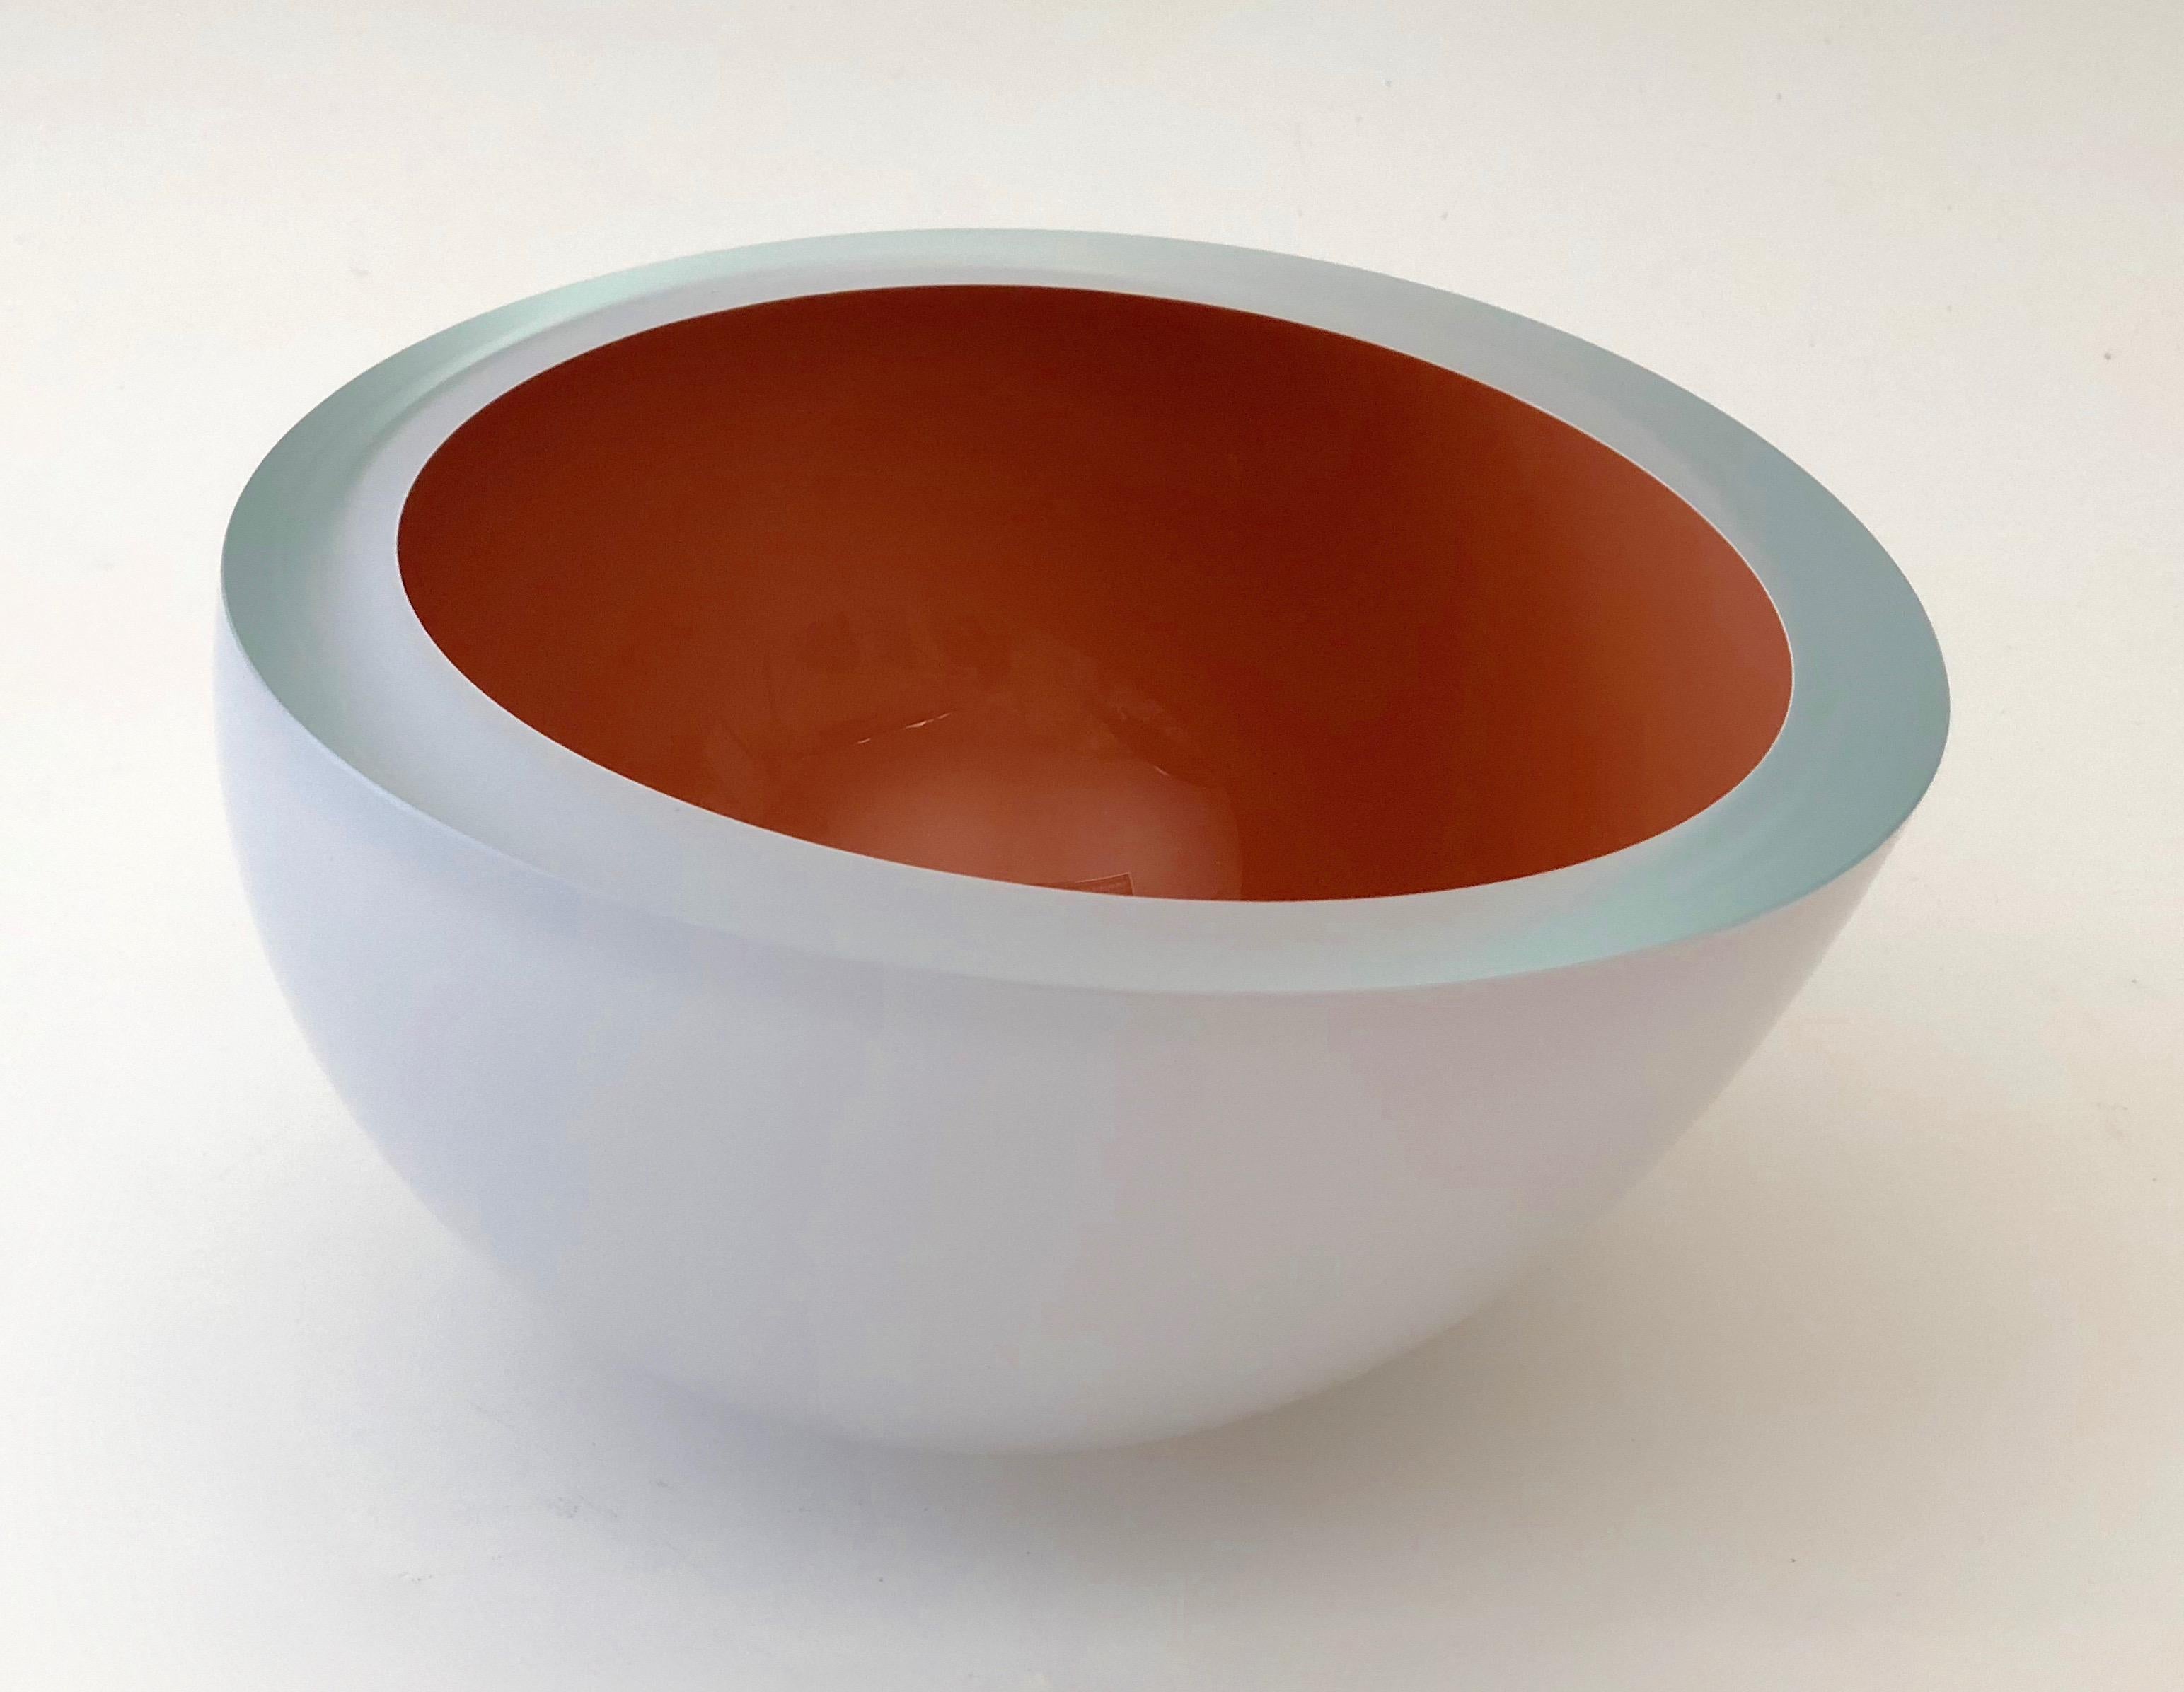 Other Contemporary Studio Glass Bowl in Coral Color, Made in the Czech Republic, 2010 For Sale